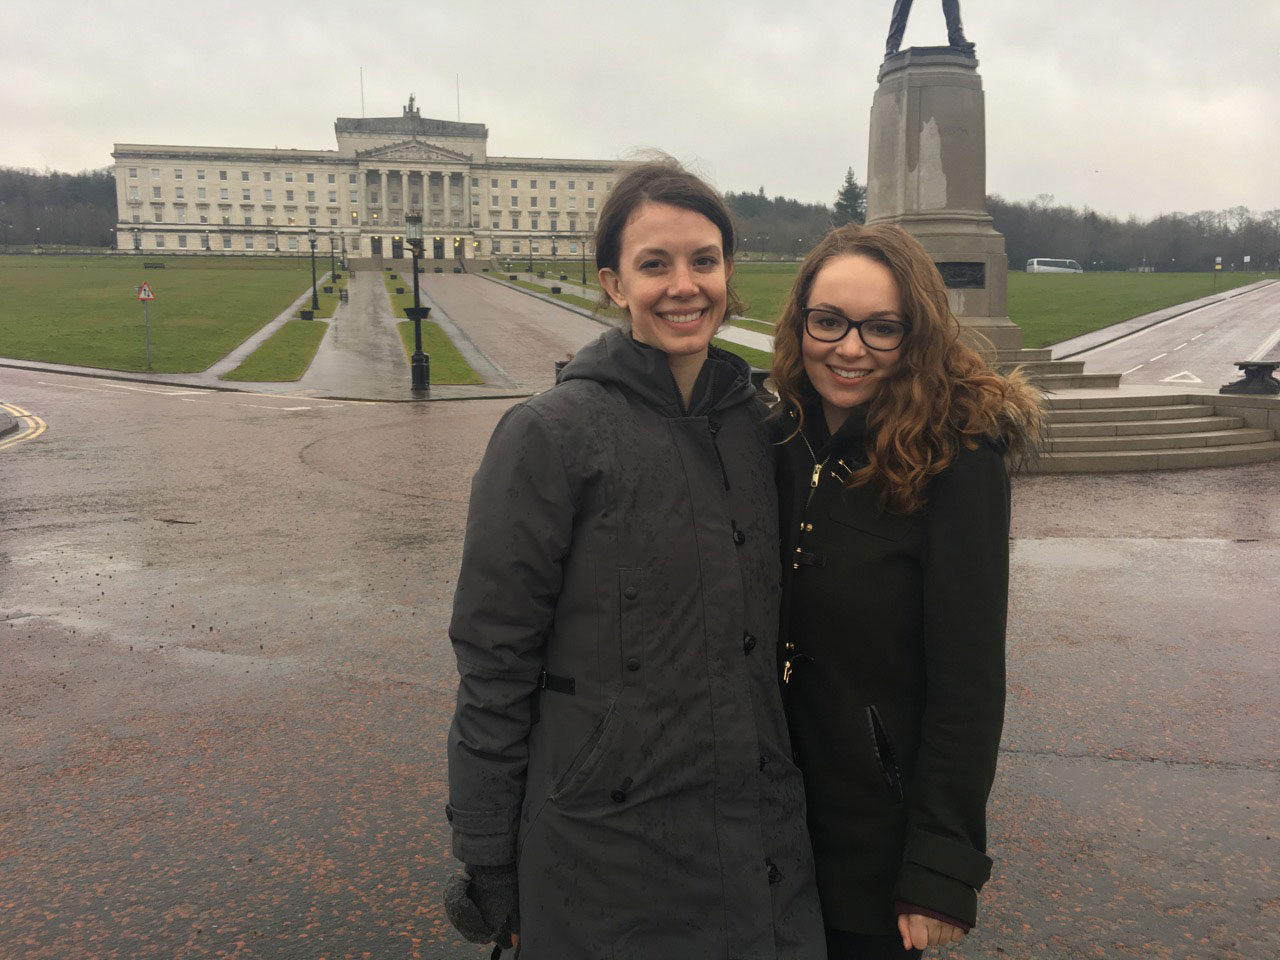 Emily Cameron (l) and Jesselyn Cook (r) visiting the Northern Ireland Assembly Buildings at Stormont